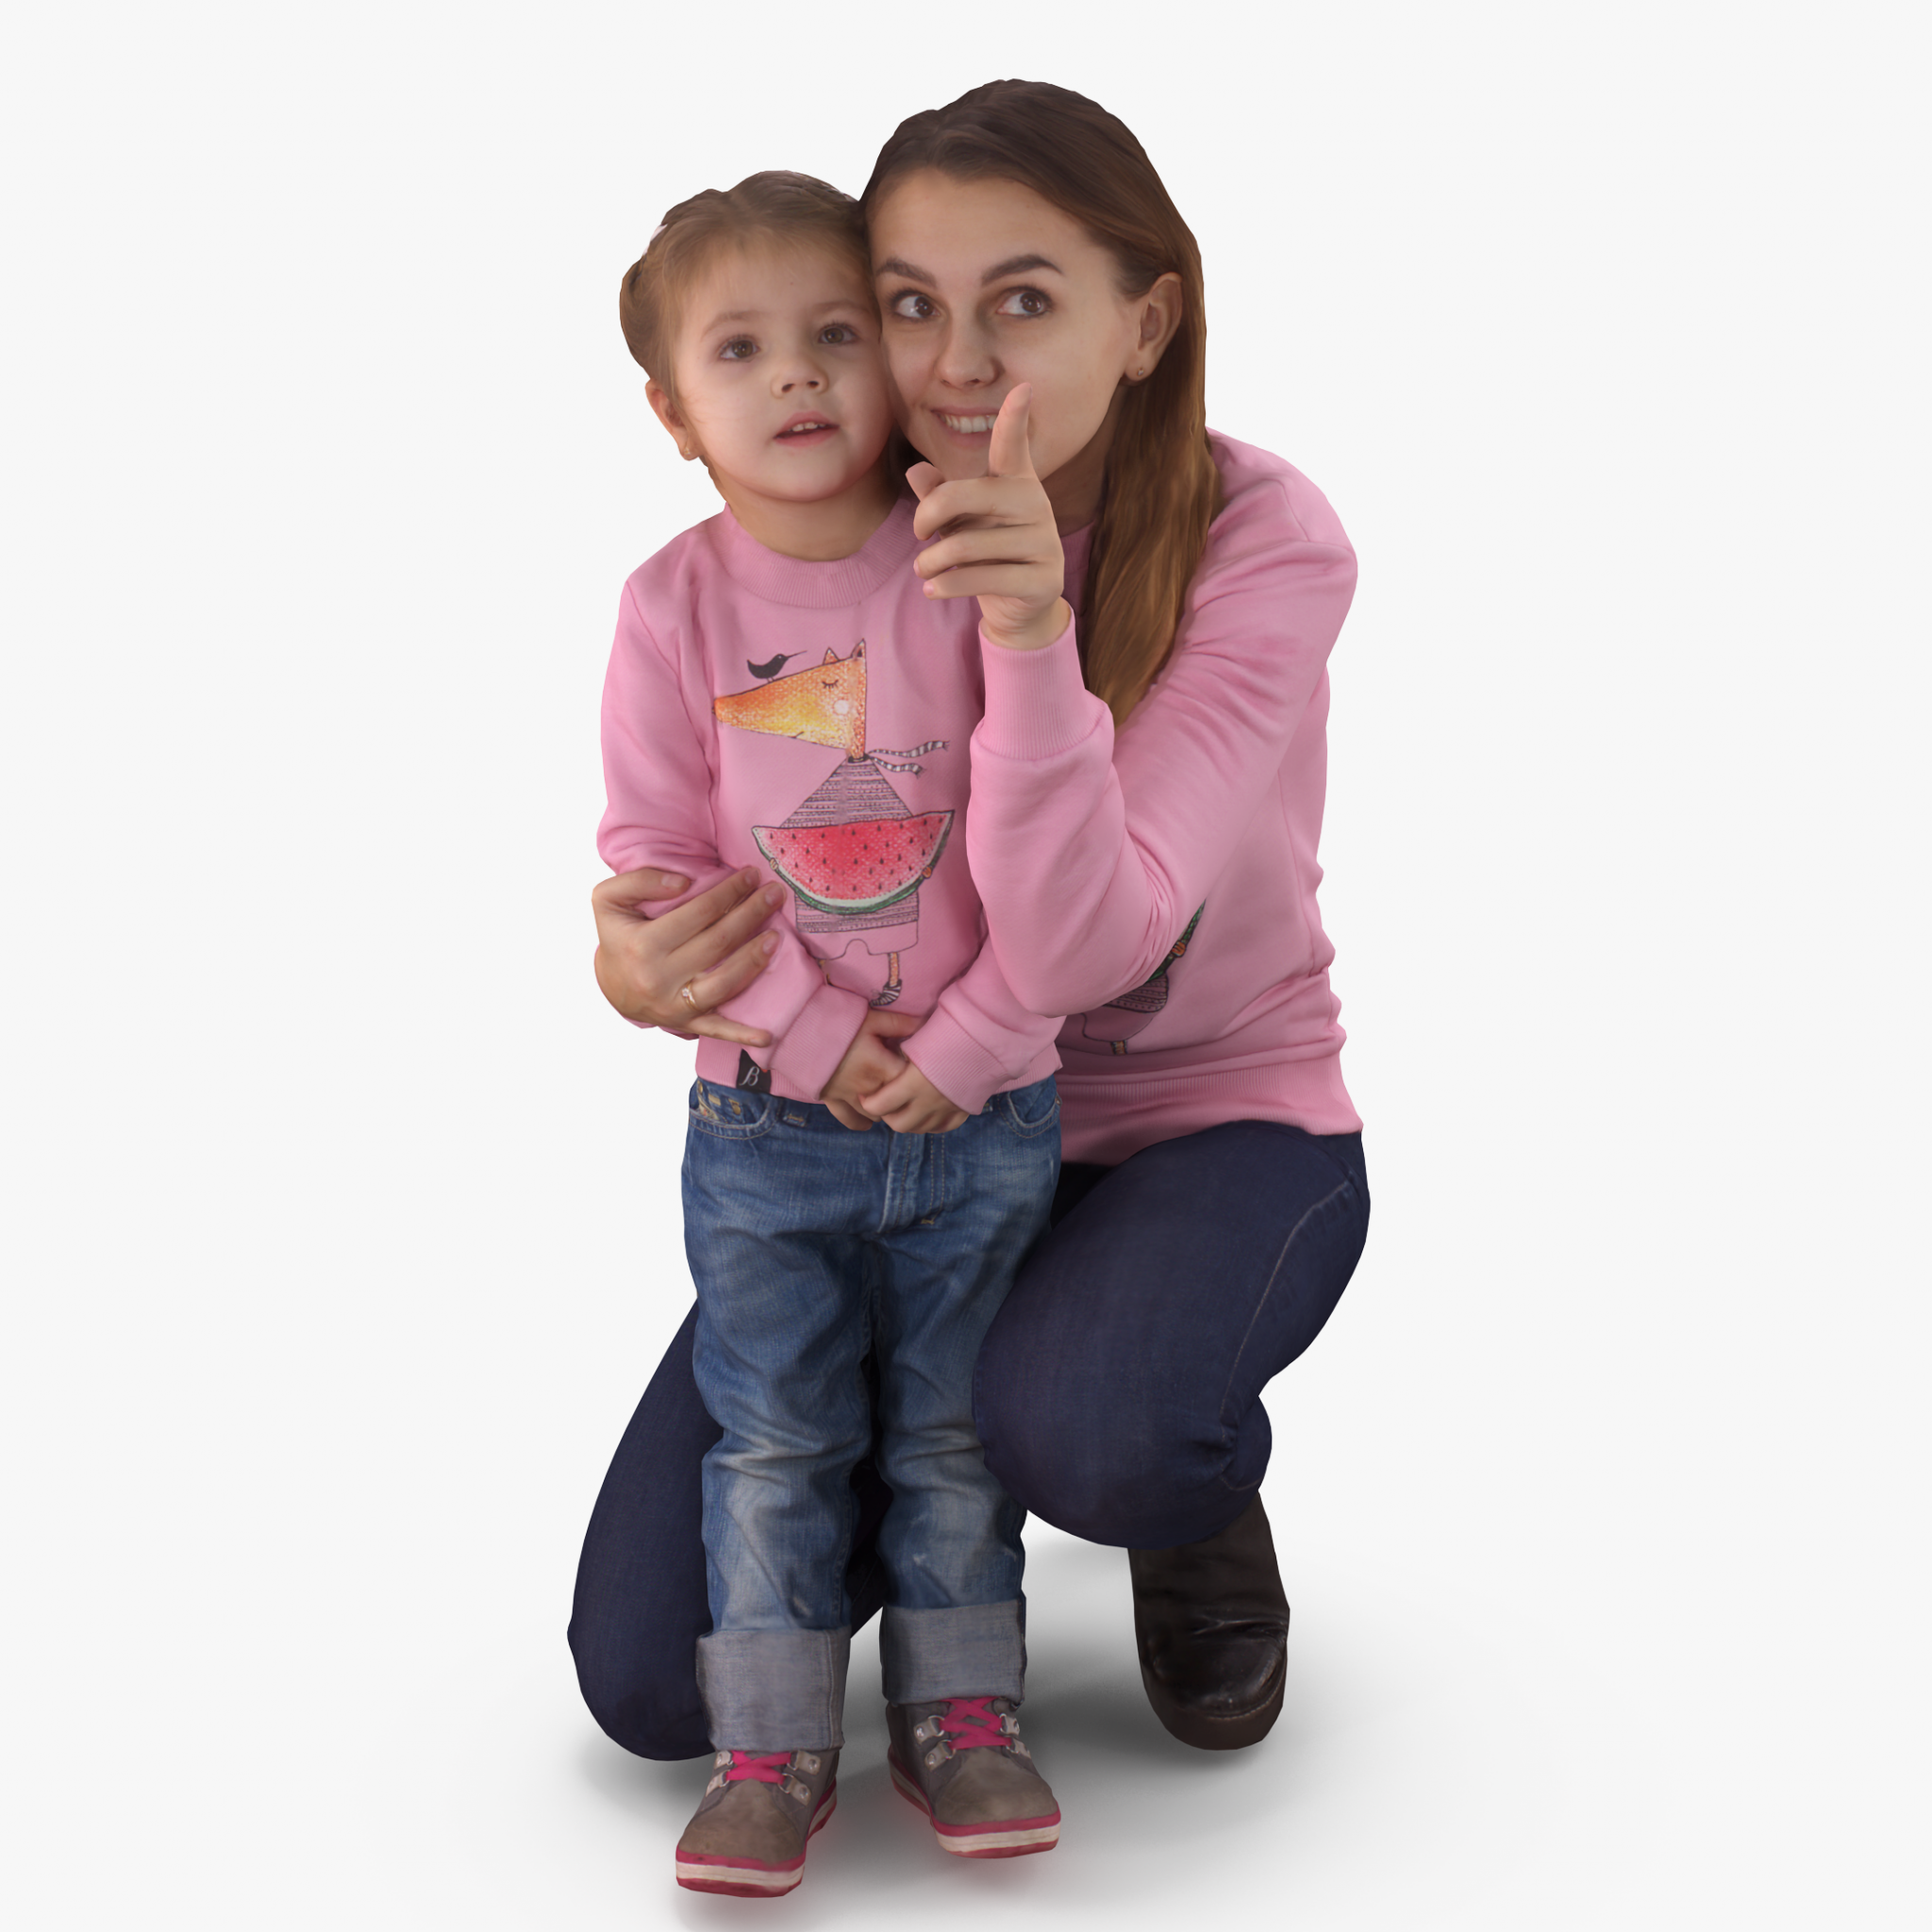 Mom and Daughter 3D Model | 3DTree Scanning Studio